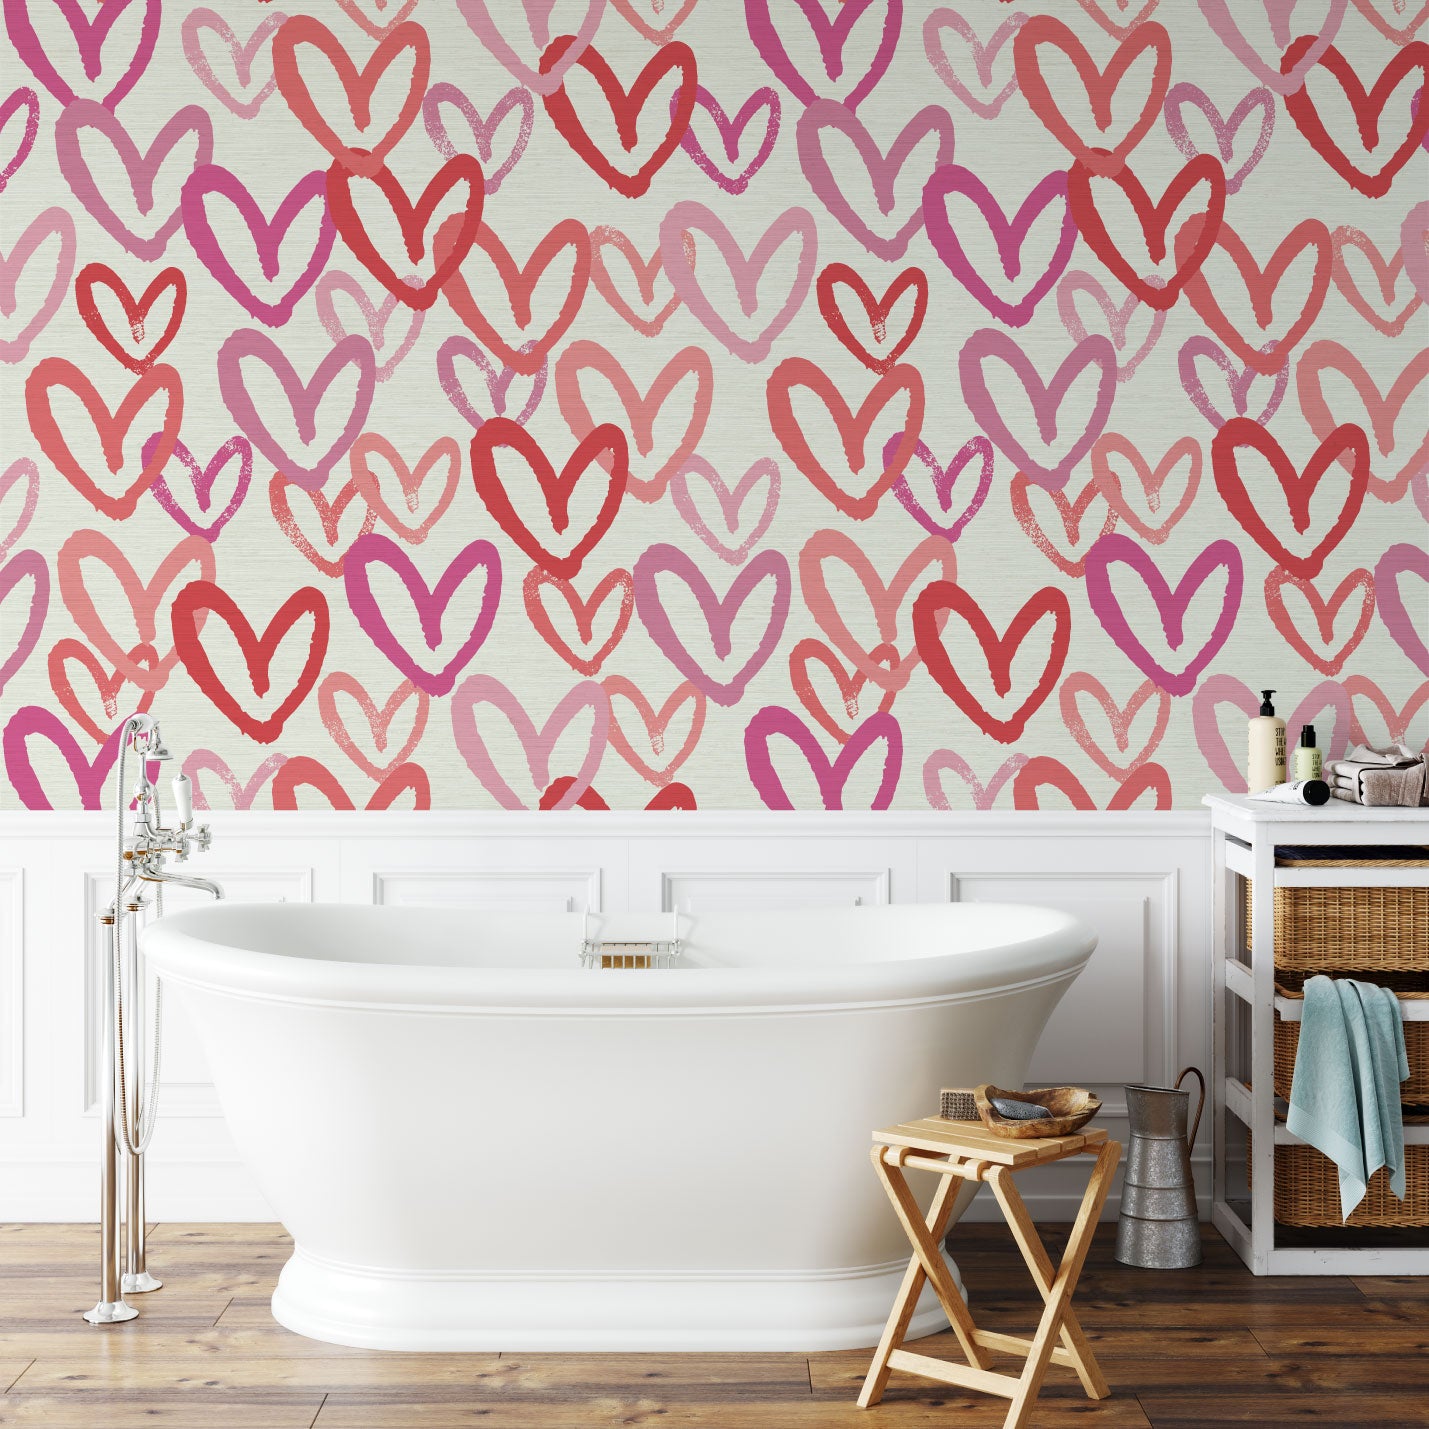 Printed grasscloth wallpaper in allover oversized layered heart print great for kids bedrooms and playroom for a fun and happy wallpaper print design and decor Natural Textured Eco-Friendly Non-toxic High-quality Sustainable Interior Design Bold Custom Tailor-made Retro chic House of Shan Imperfect heart white rpink hot pink red bathroom